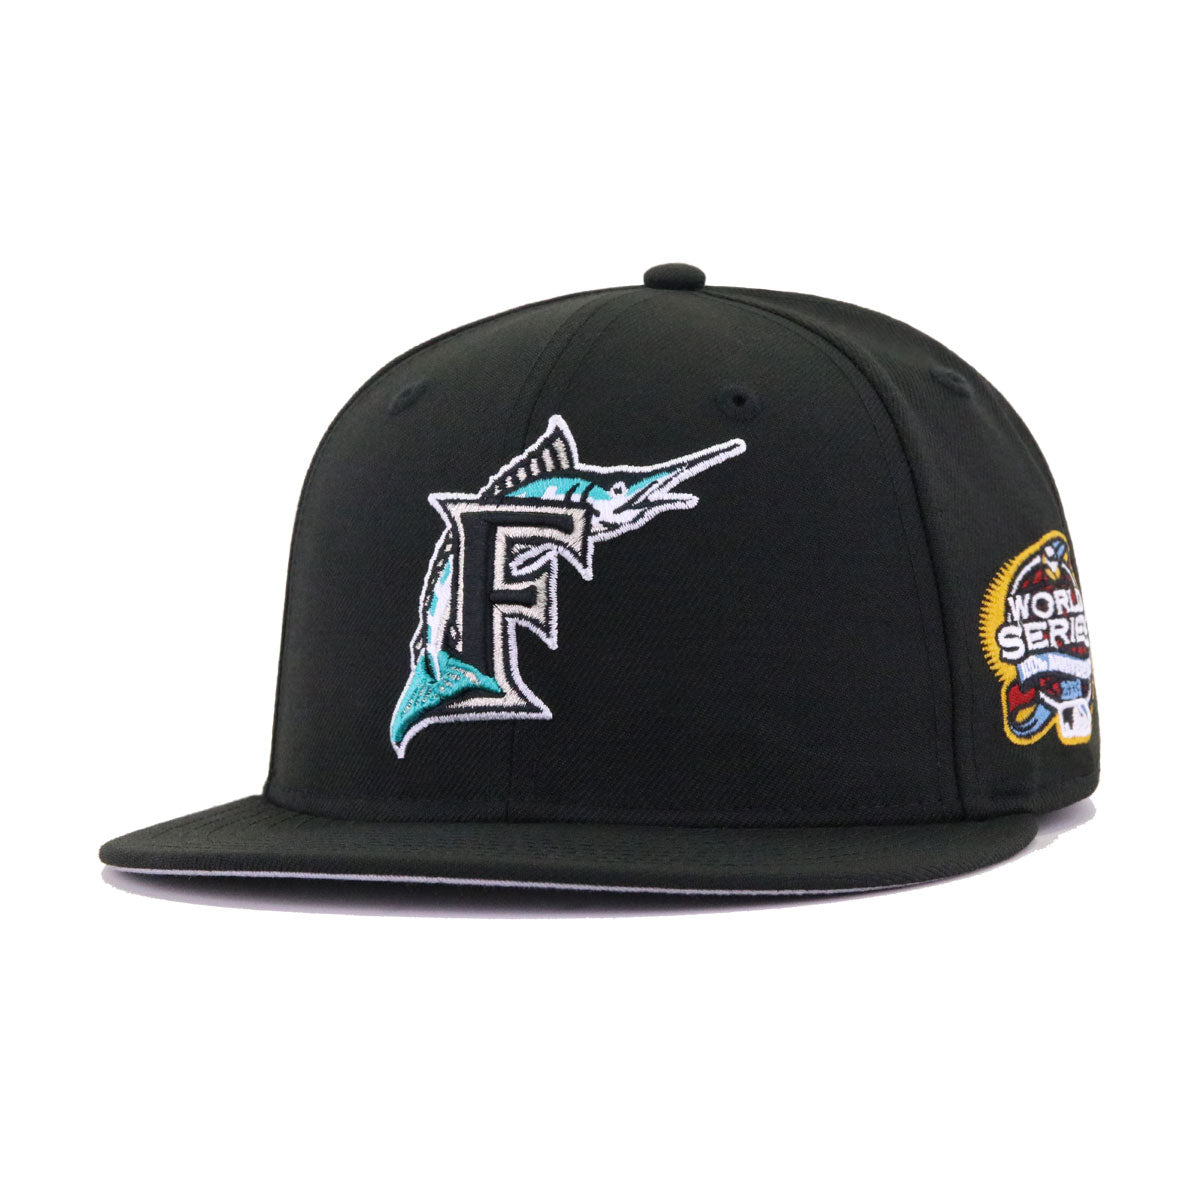 Florida Marlins Black 2003 World Series Cooperstown New Era 59Fifty Fitted